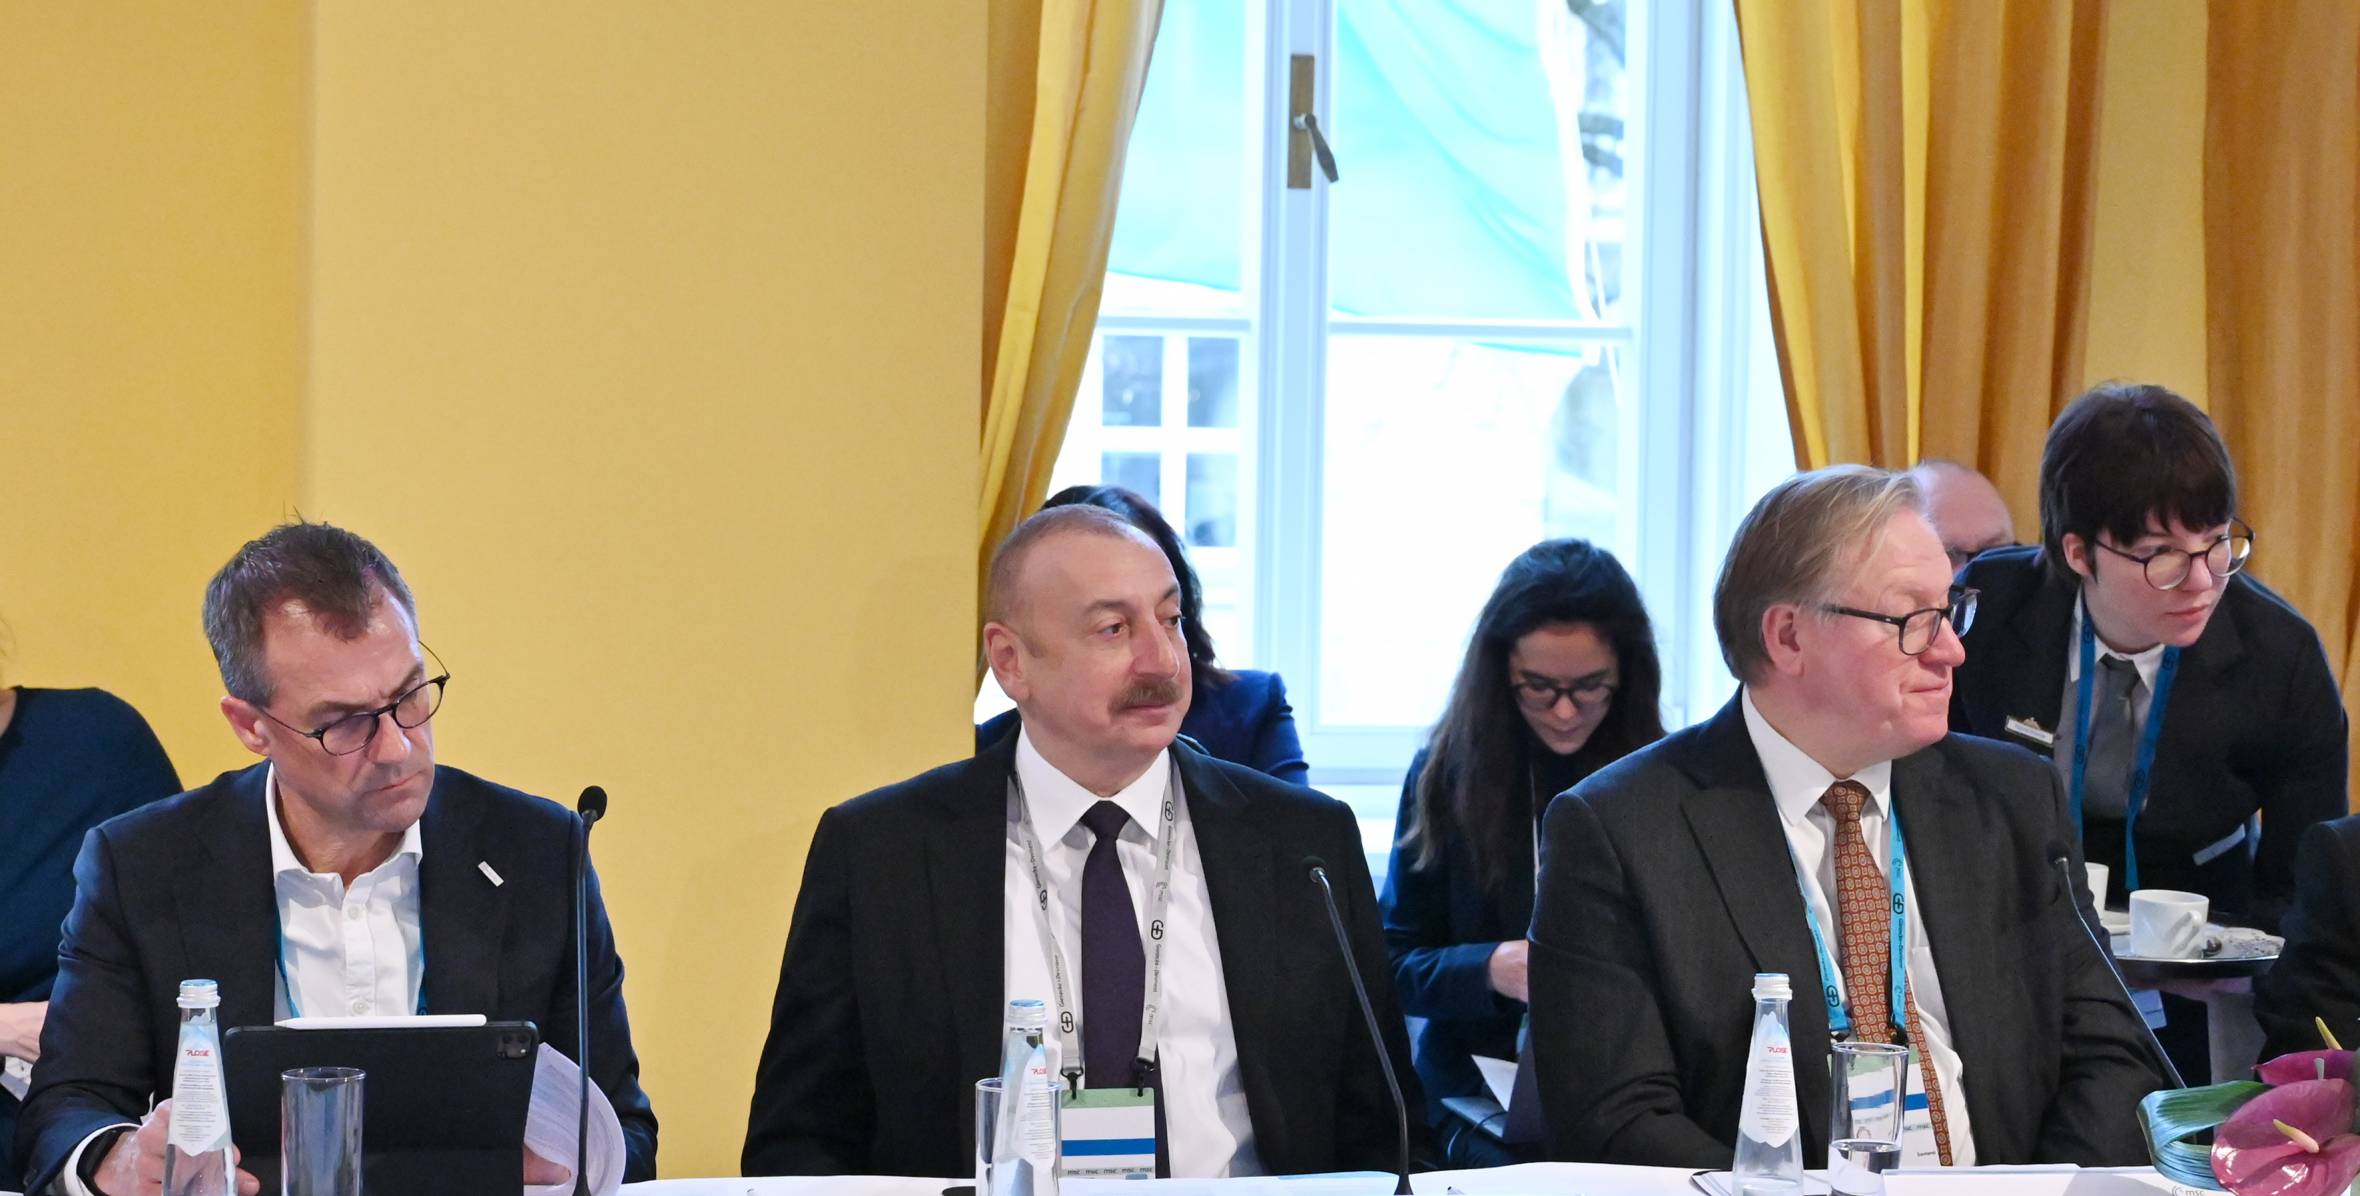 Ilham Aliyev attended round table on energy security on sidelines of Munich Security Conference